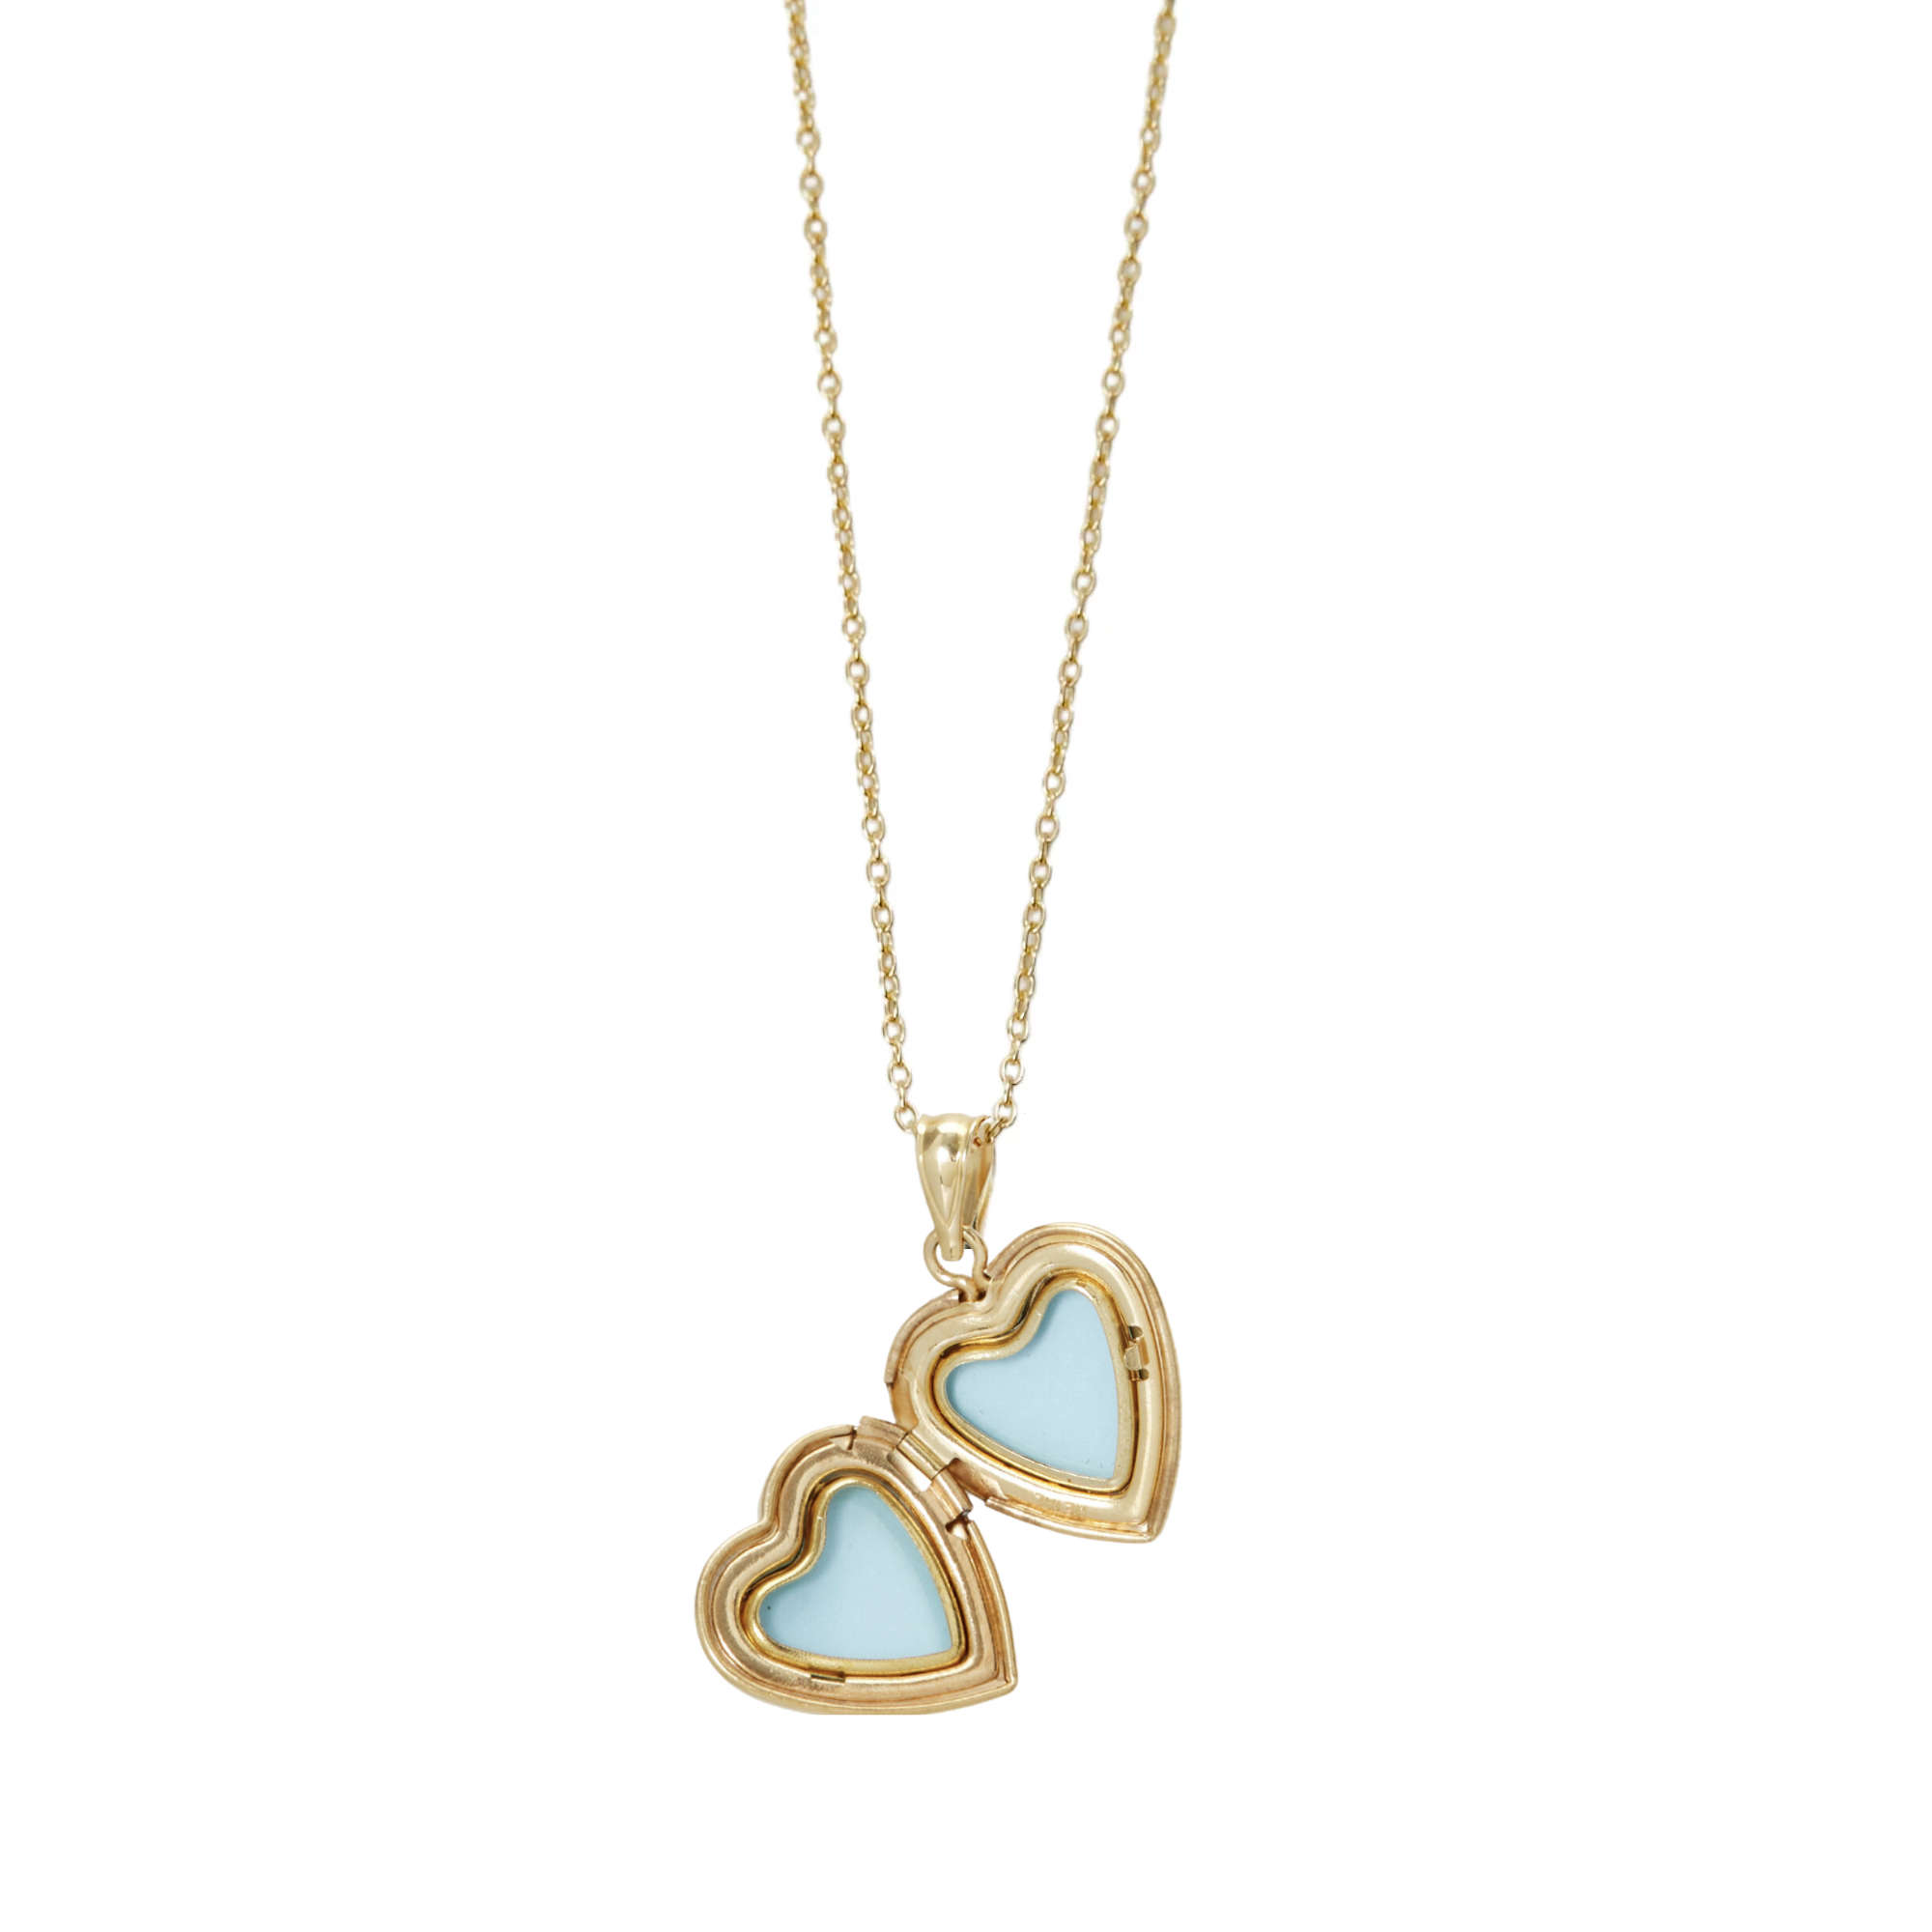 THE POLISHED HEART LOCKET NECKLACE